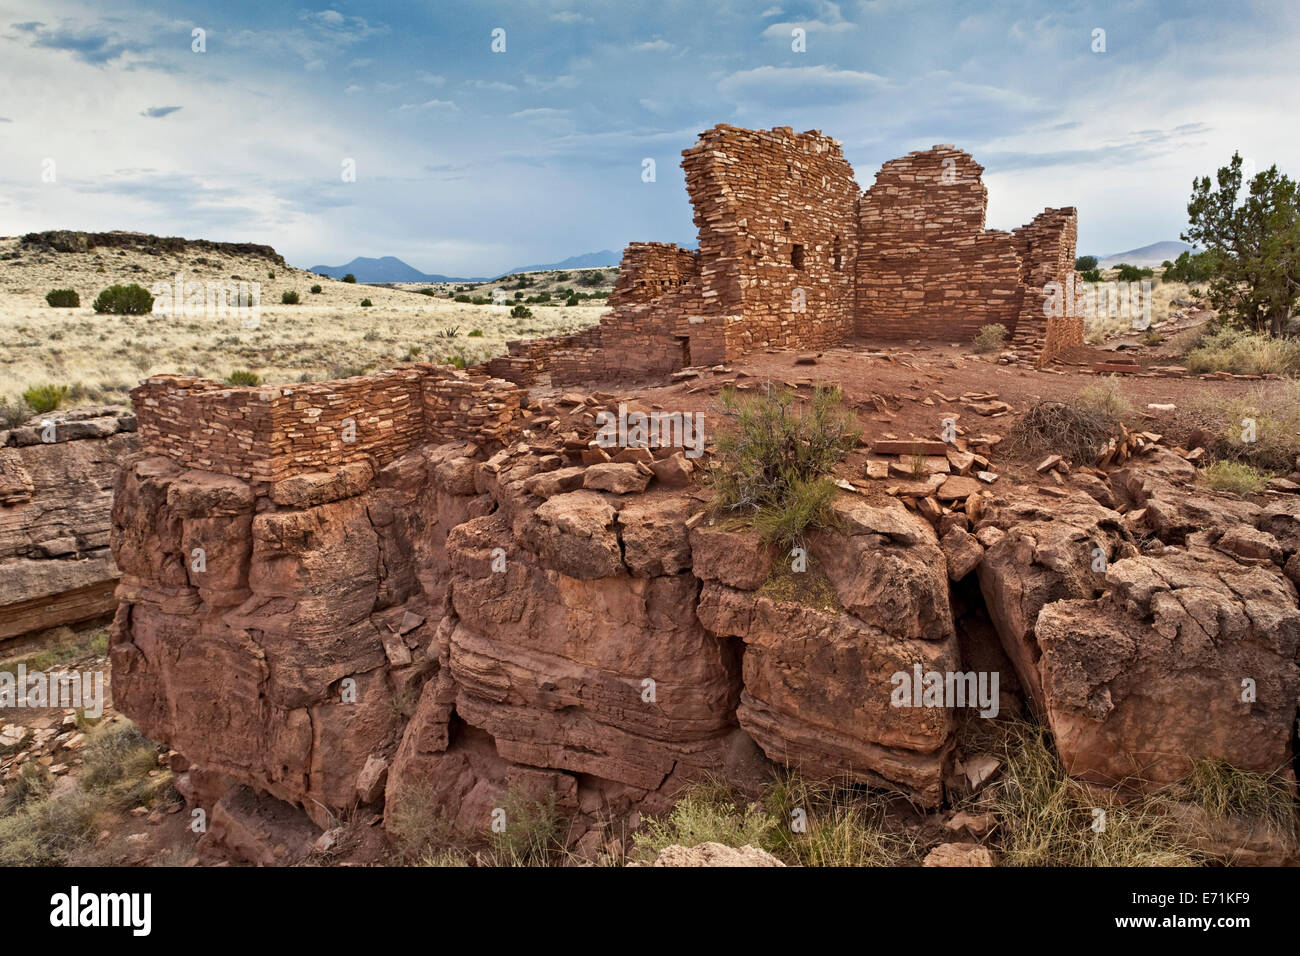 Box Canyon Ruins - The Wupatki National Monument is a National Monument located in north-central Arizona, near Flagstaff. Stock Photo